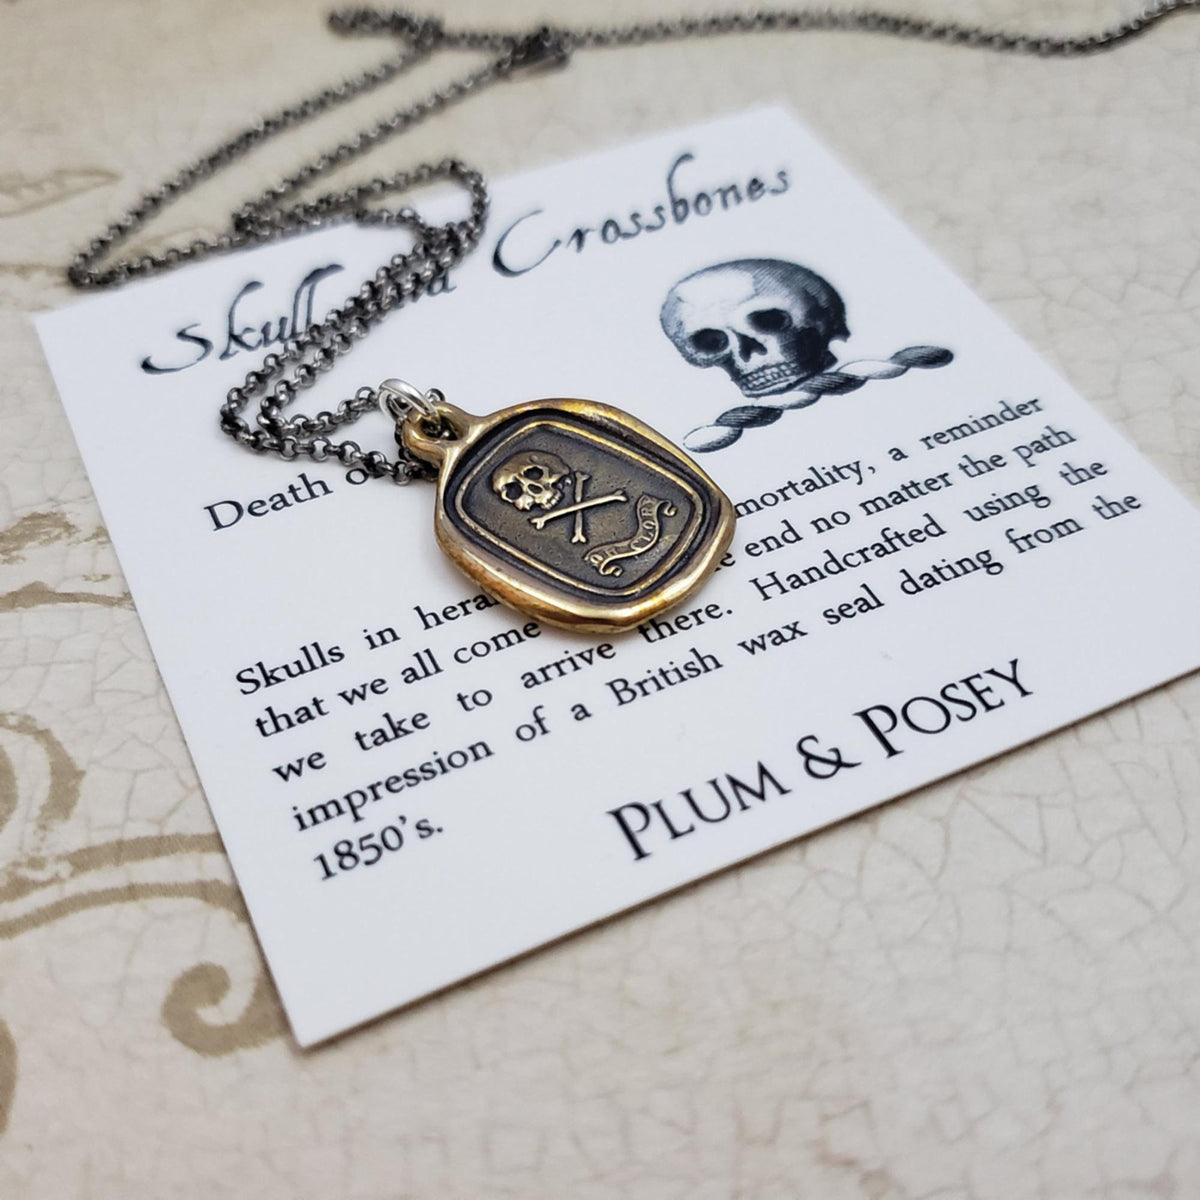 Skull & Crossbones 'I do not fear your heart' necklace in Gold Vermeil -  Plum and Posey